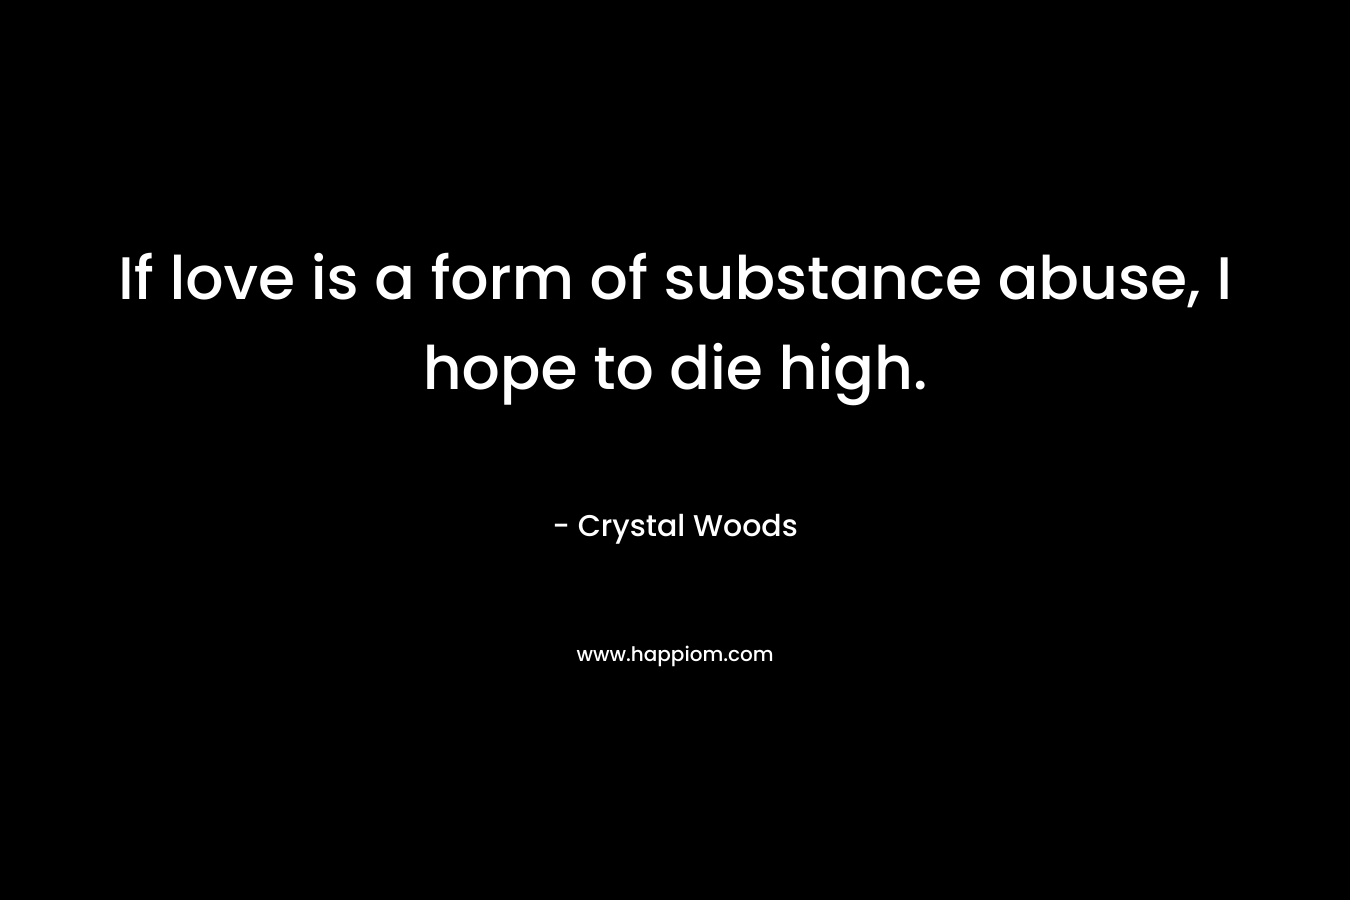 If love is a form of substance abuse, I hope to die high. – Crystal Woods